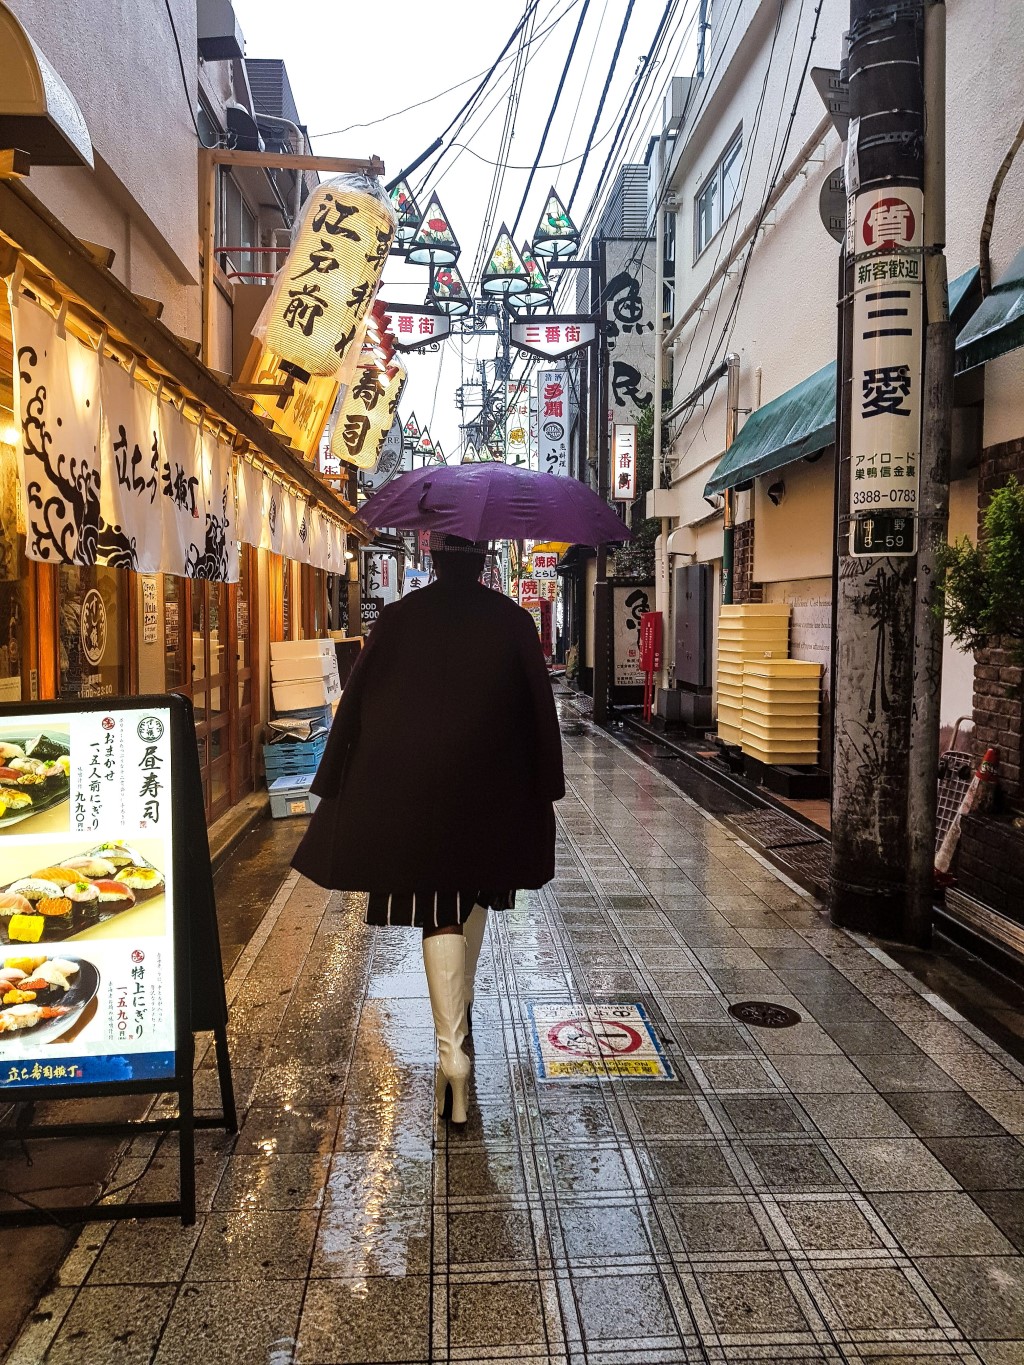 Student in boots and jacket with umbrella walking down rainy Nakano Broadway with lanterns overhead and stores nearby